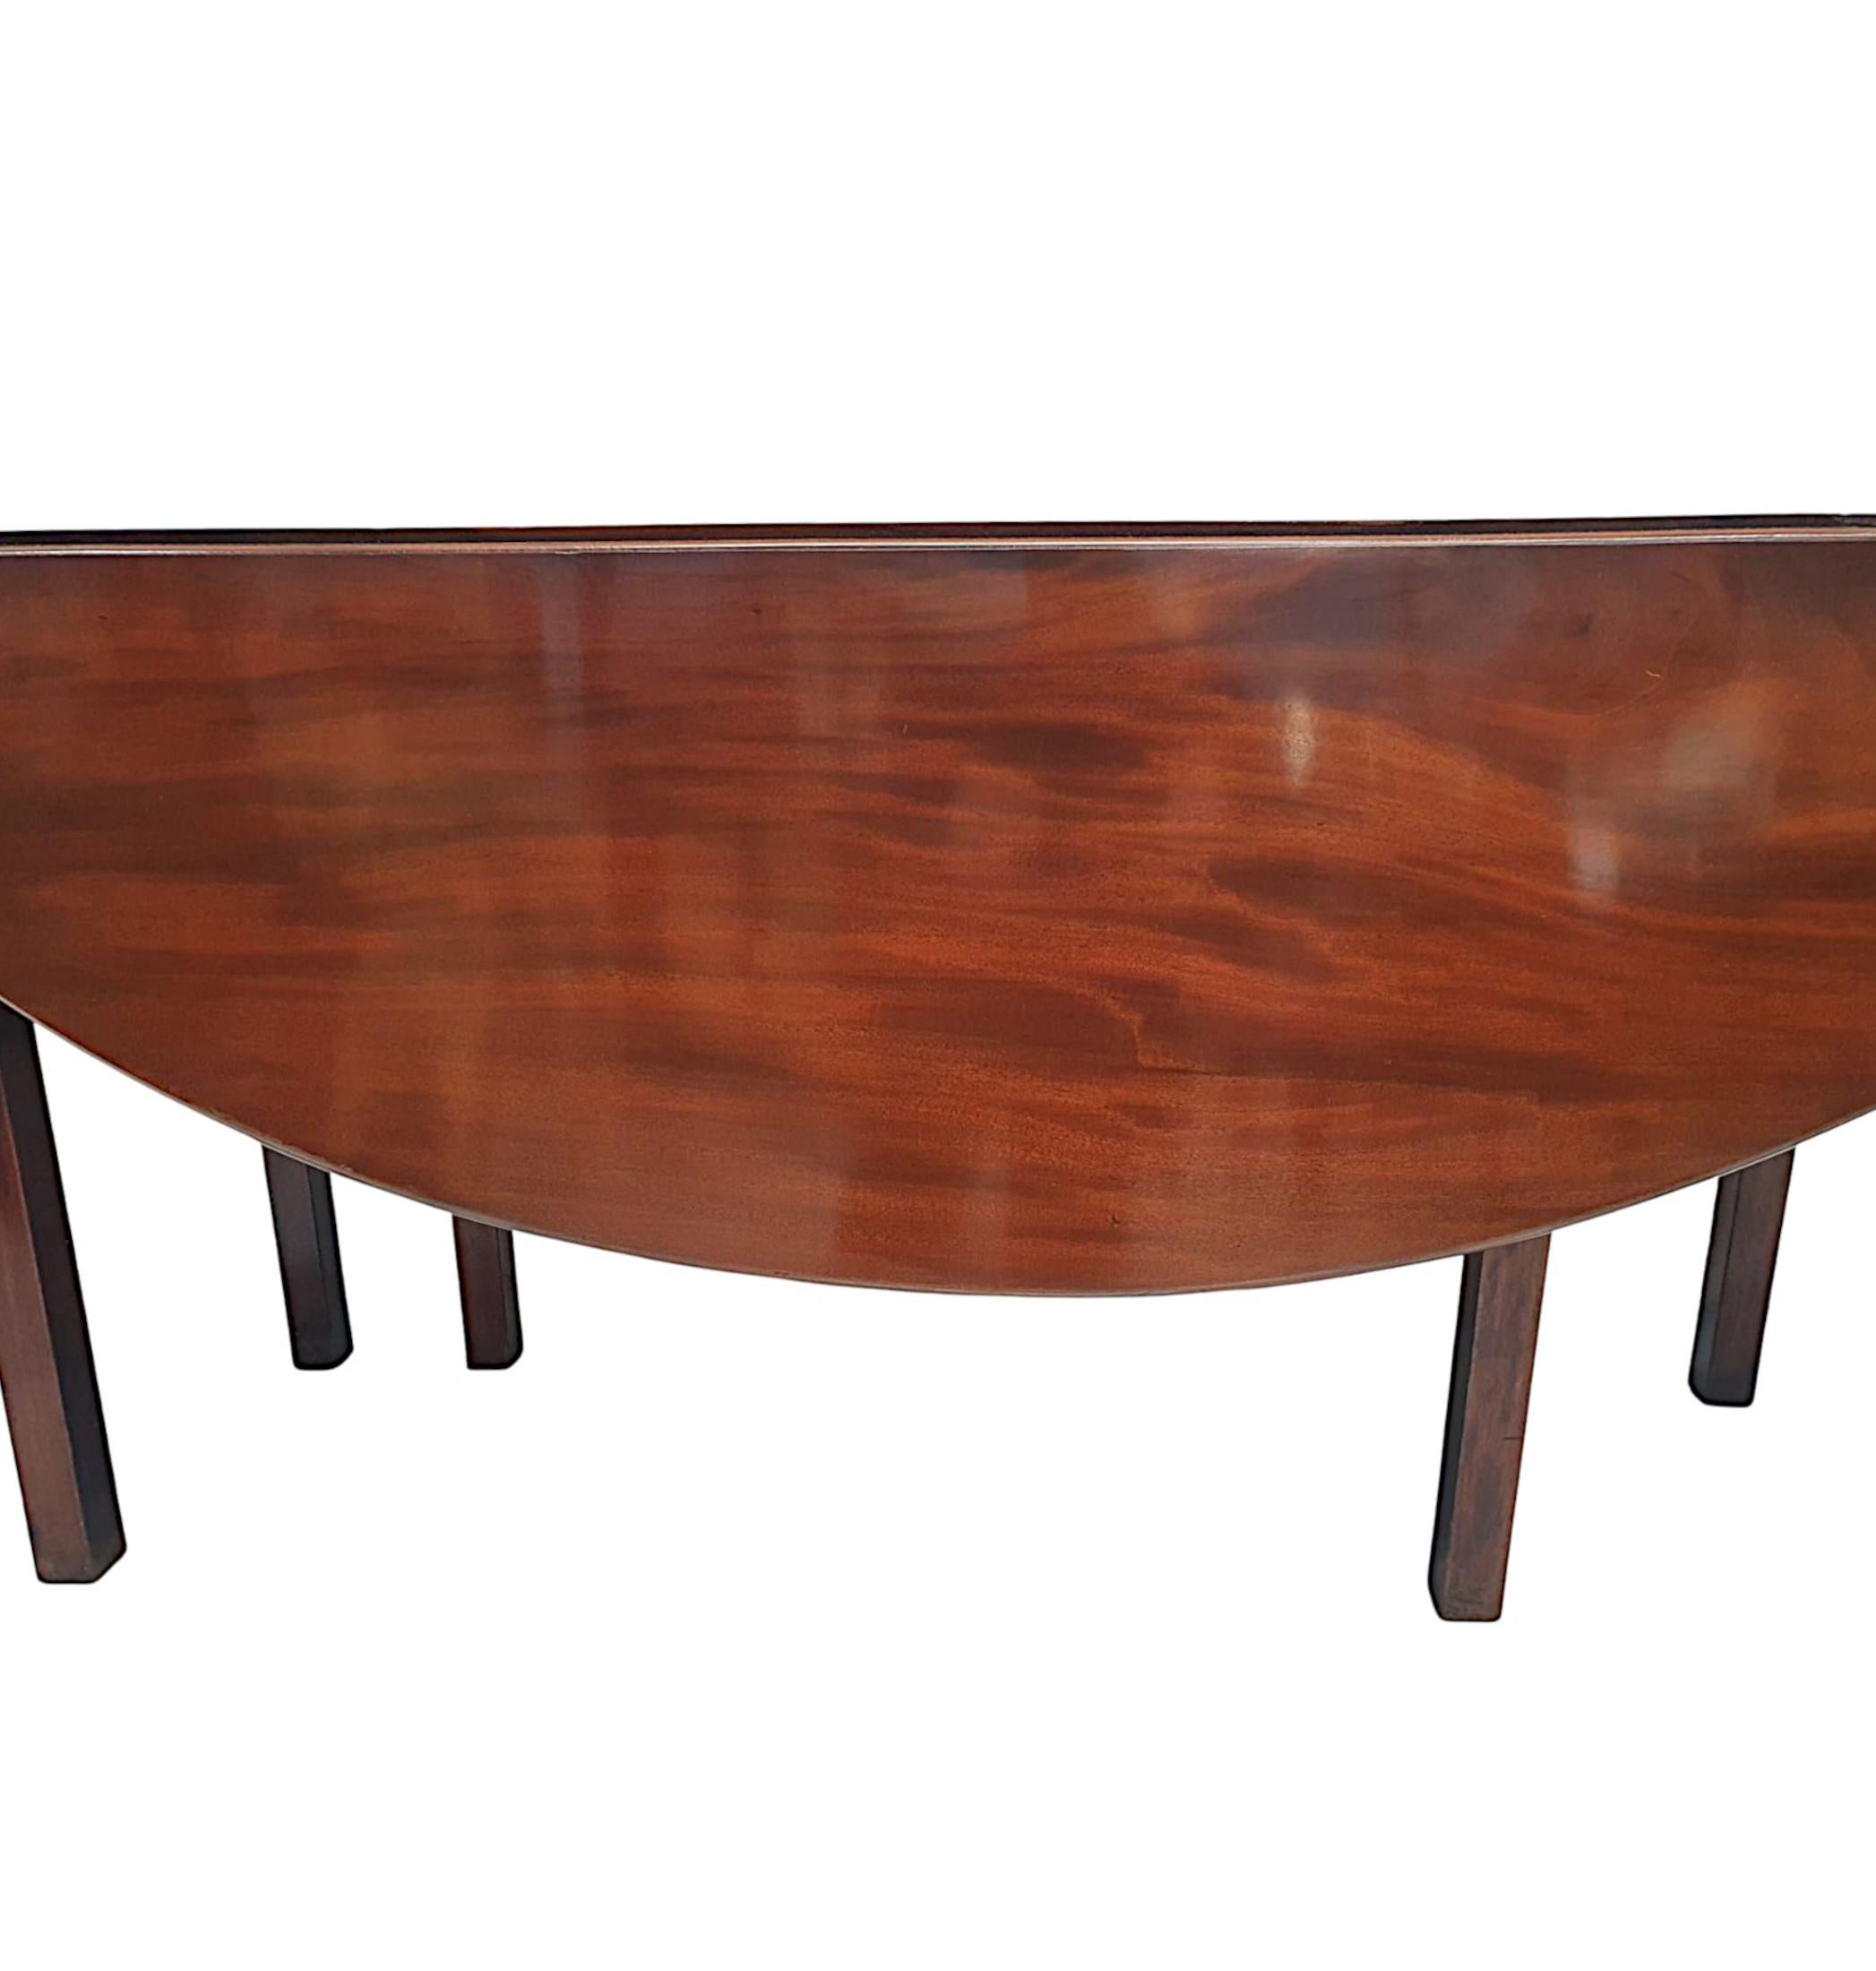 Very Rare and Fine 19th Century Irish Hunt Table For Sale 2